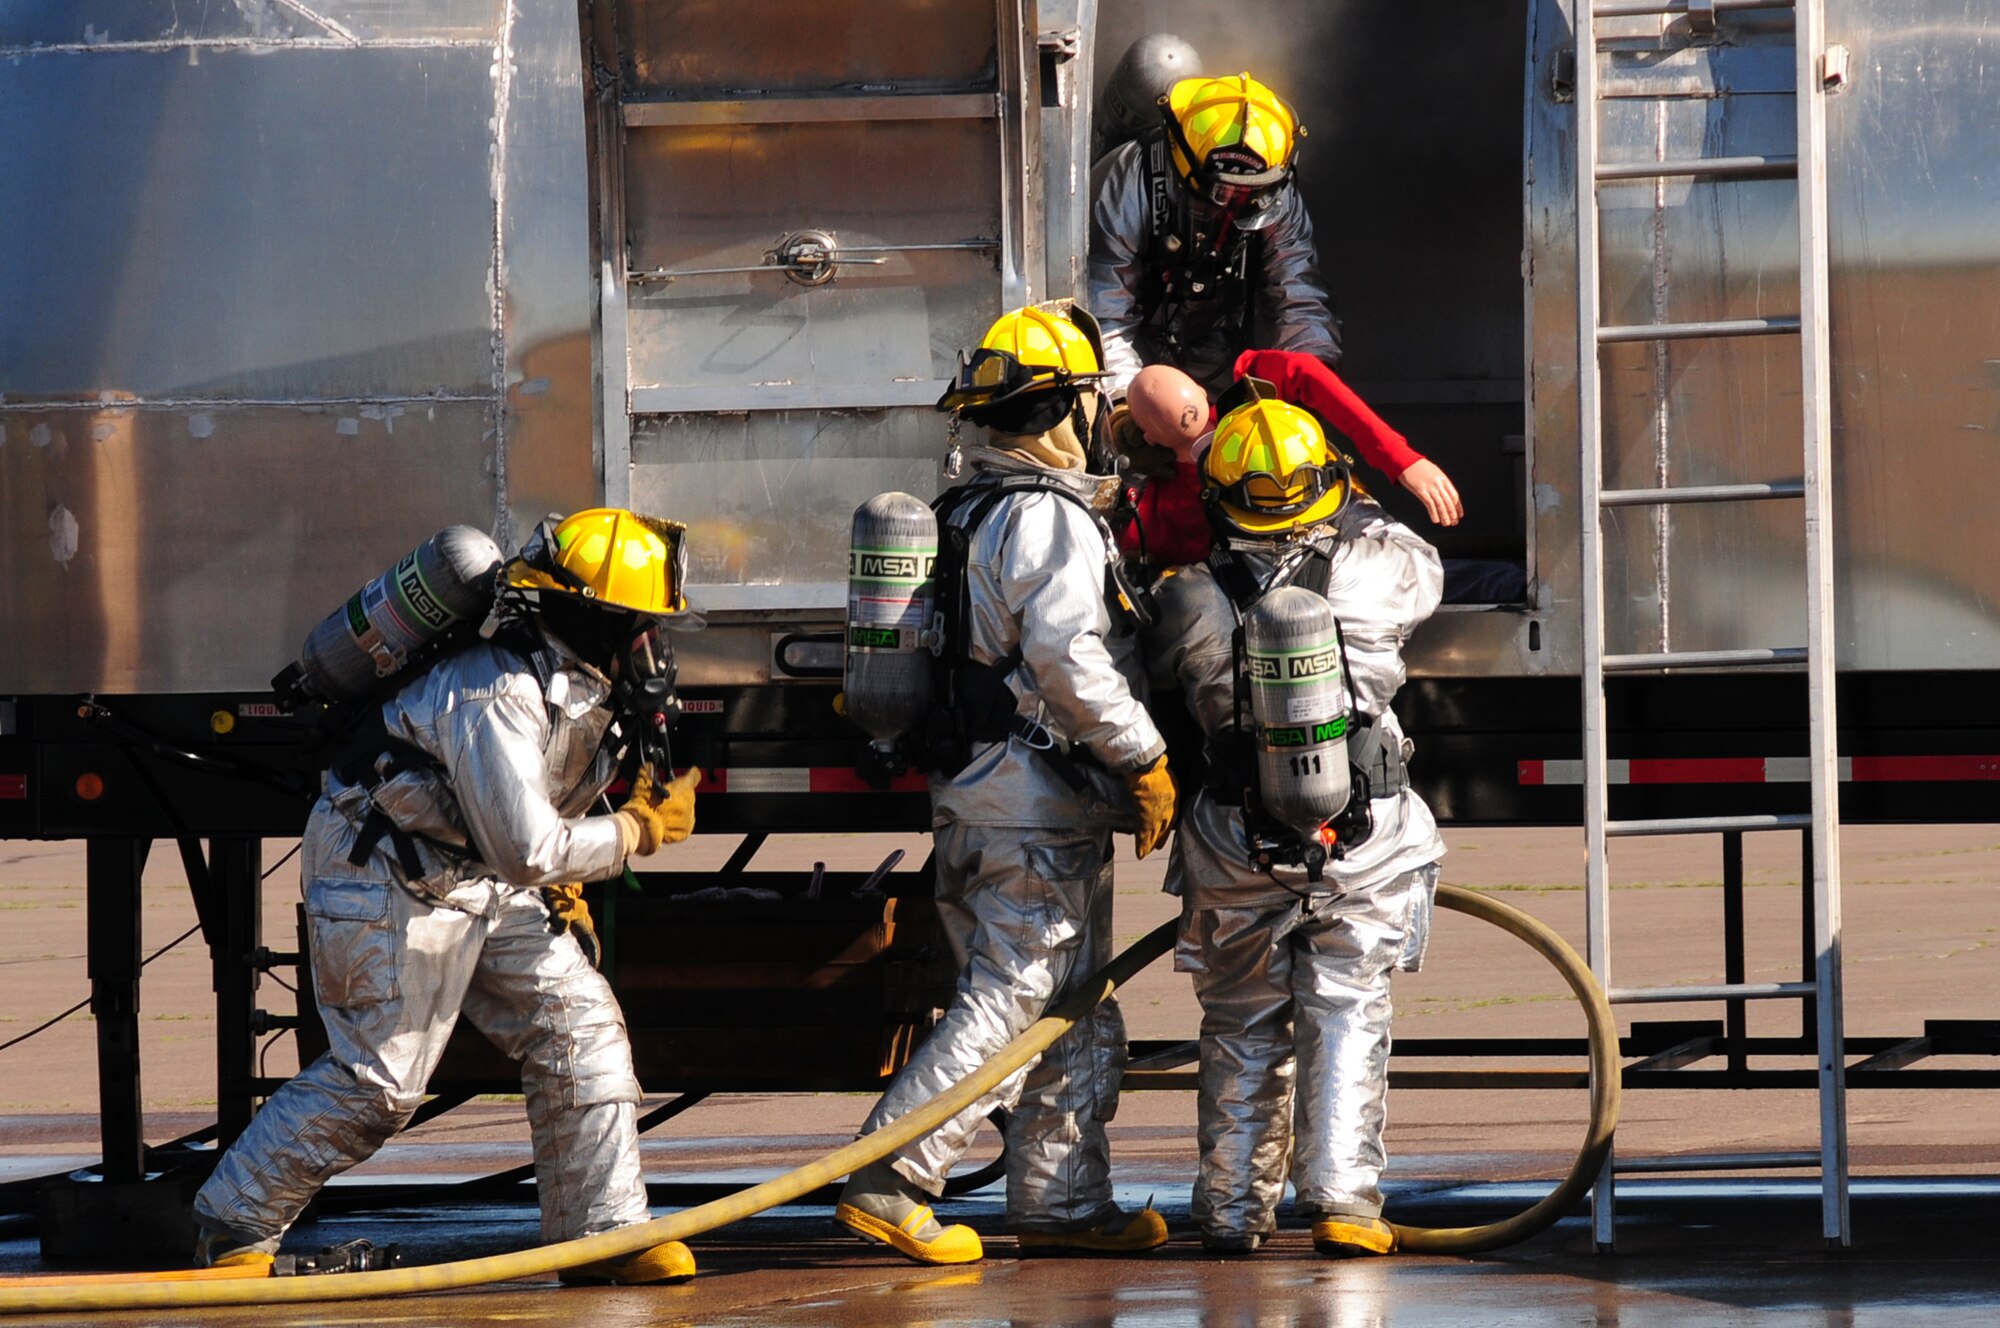 U.S. Air National Guard firefighters of the 148th Fighter Wing rescue a survivor from a simulated commercial airliner crash during a Major Accident Response Exercise (MARE) at the Duluth International Airport, Minn., June 3, 2010. The MARE was held in conjunction with local, state and federal emergency response agencies to test and validate emergency response capabilities. (U.S. Air Force photo by Master Sgt. Jason W. Rolfe/Released)